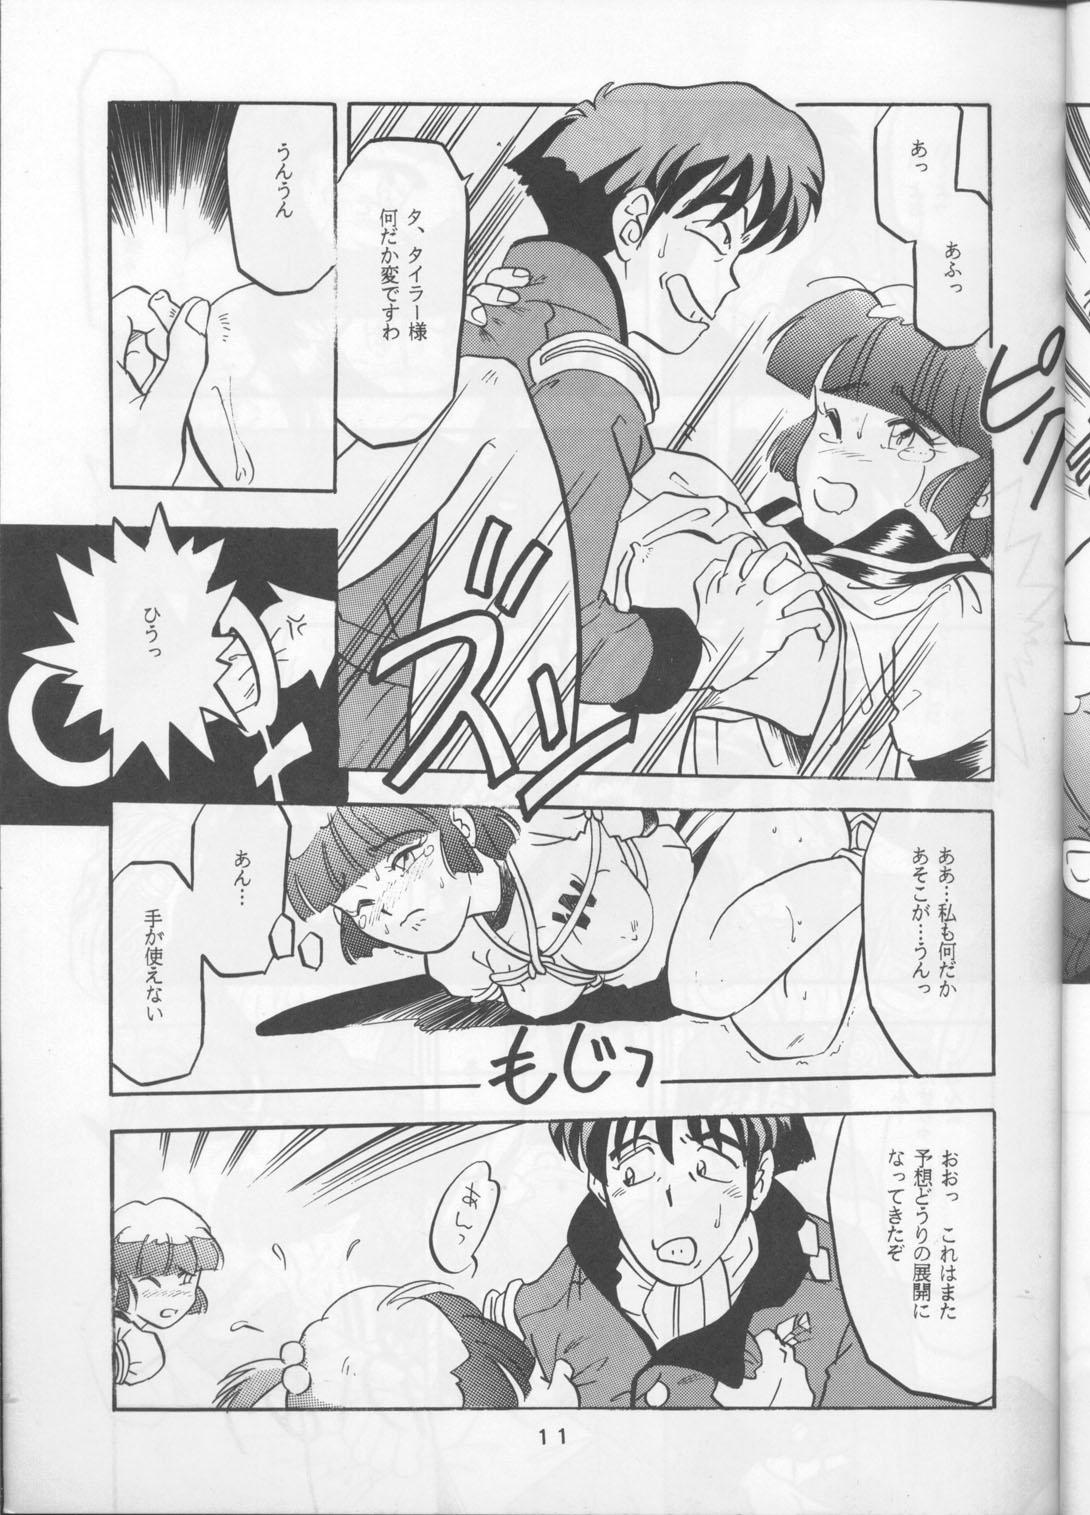 Screaming Per favore, YAMAMOTO！ - Irresponsible captain tylor Muscular - Page 10